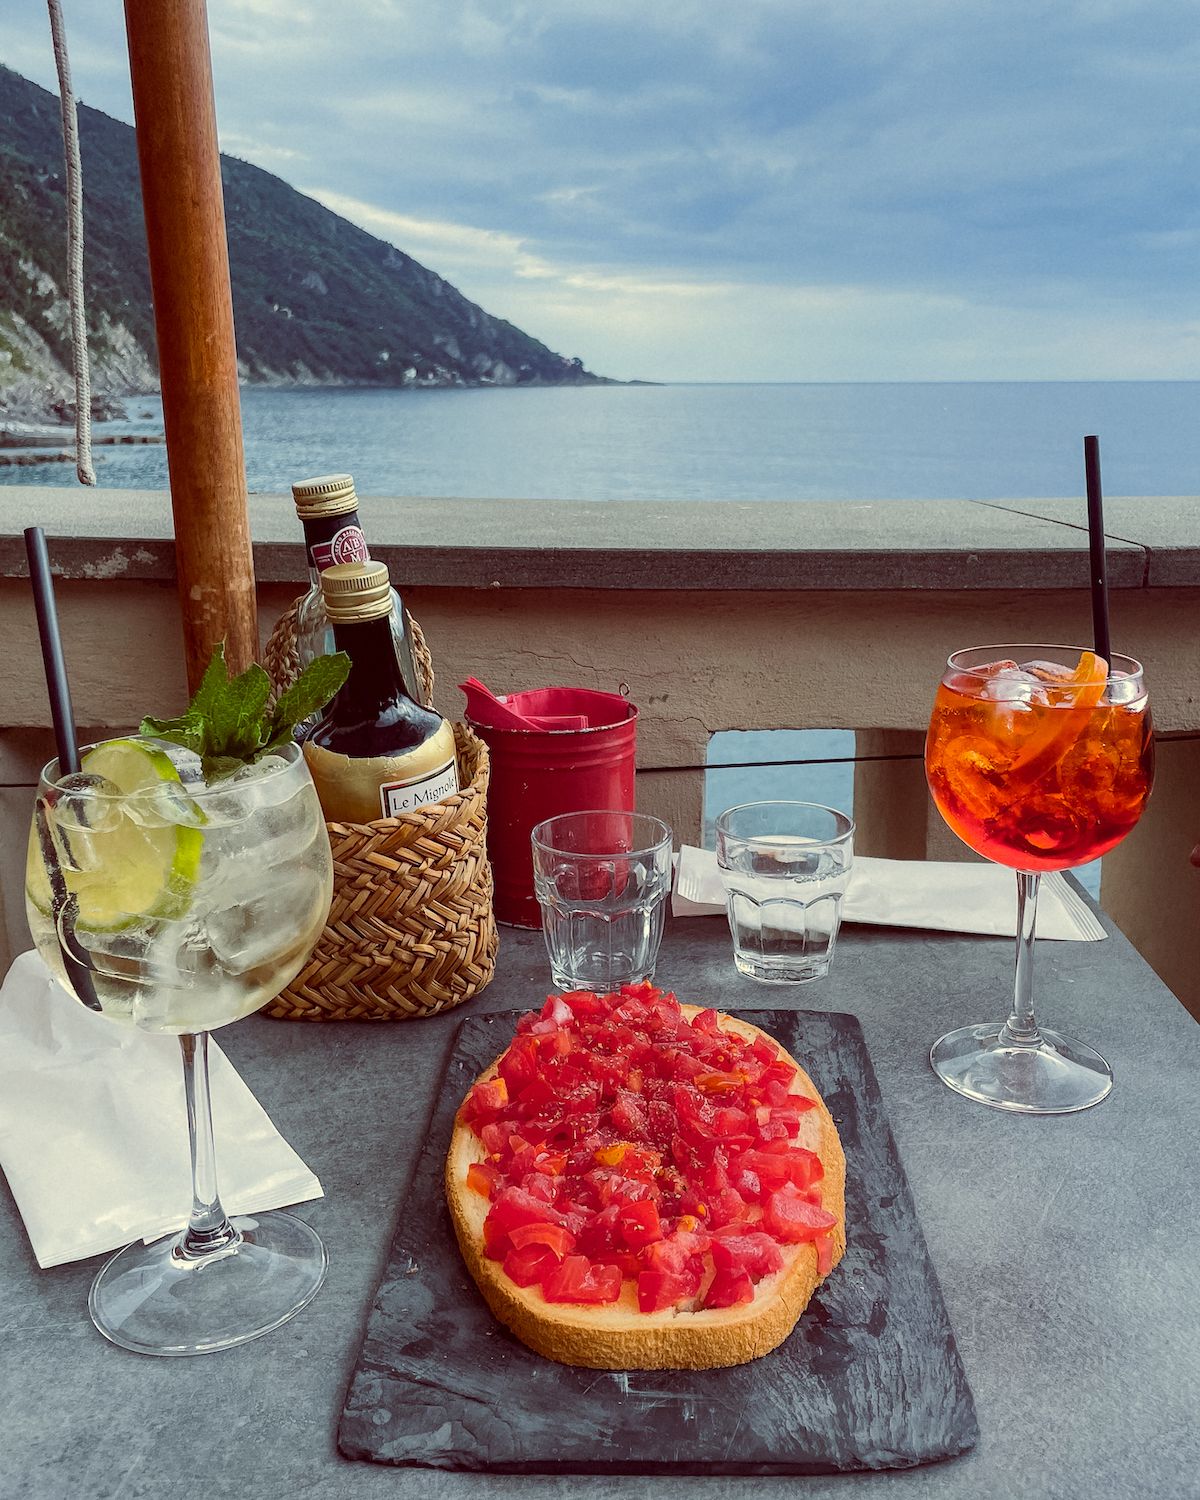 Bruschetta and spritzes at an outdoor table overlooking the sea in Camogli